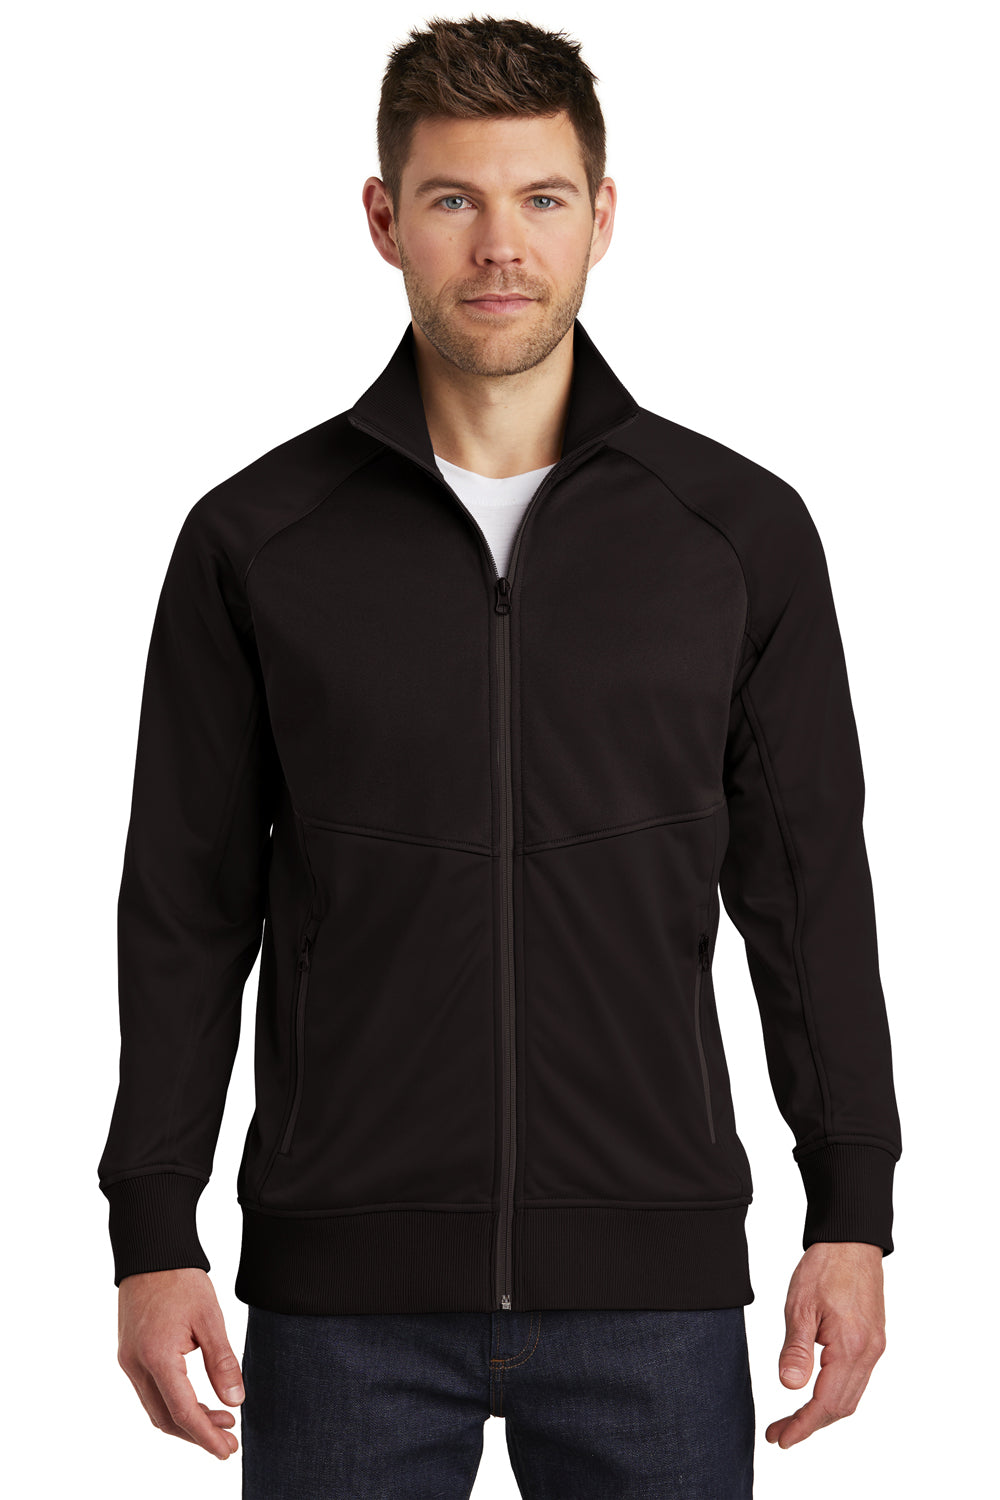 The North Face NF0A3SEW Mens Tech Full Zip Fleece Jacket Black Front